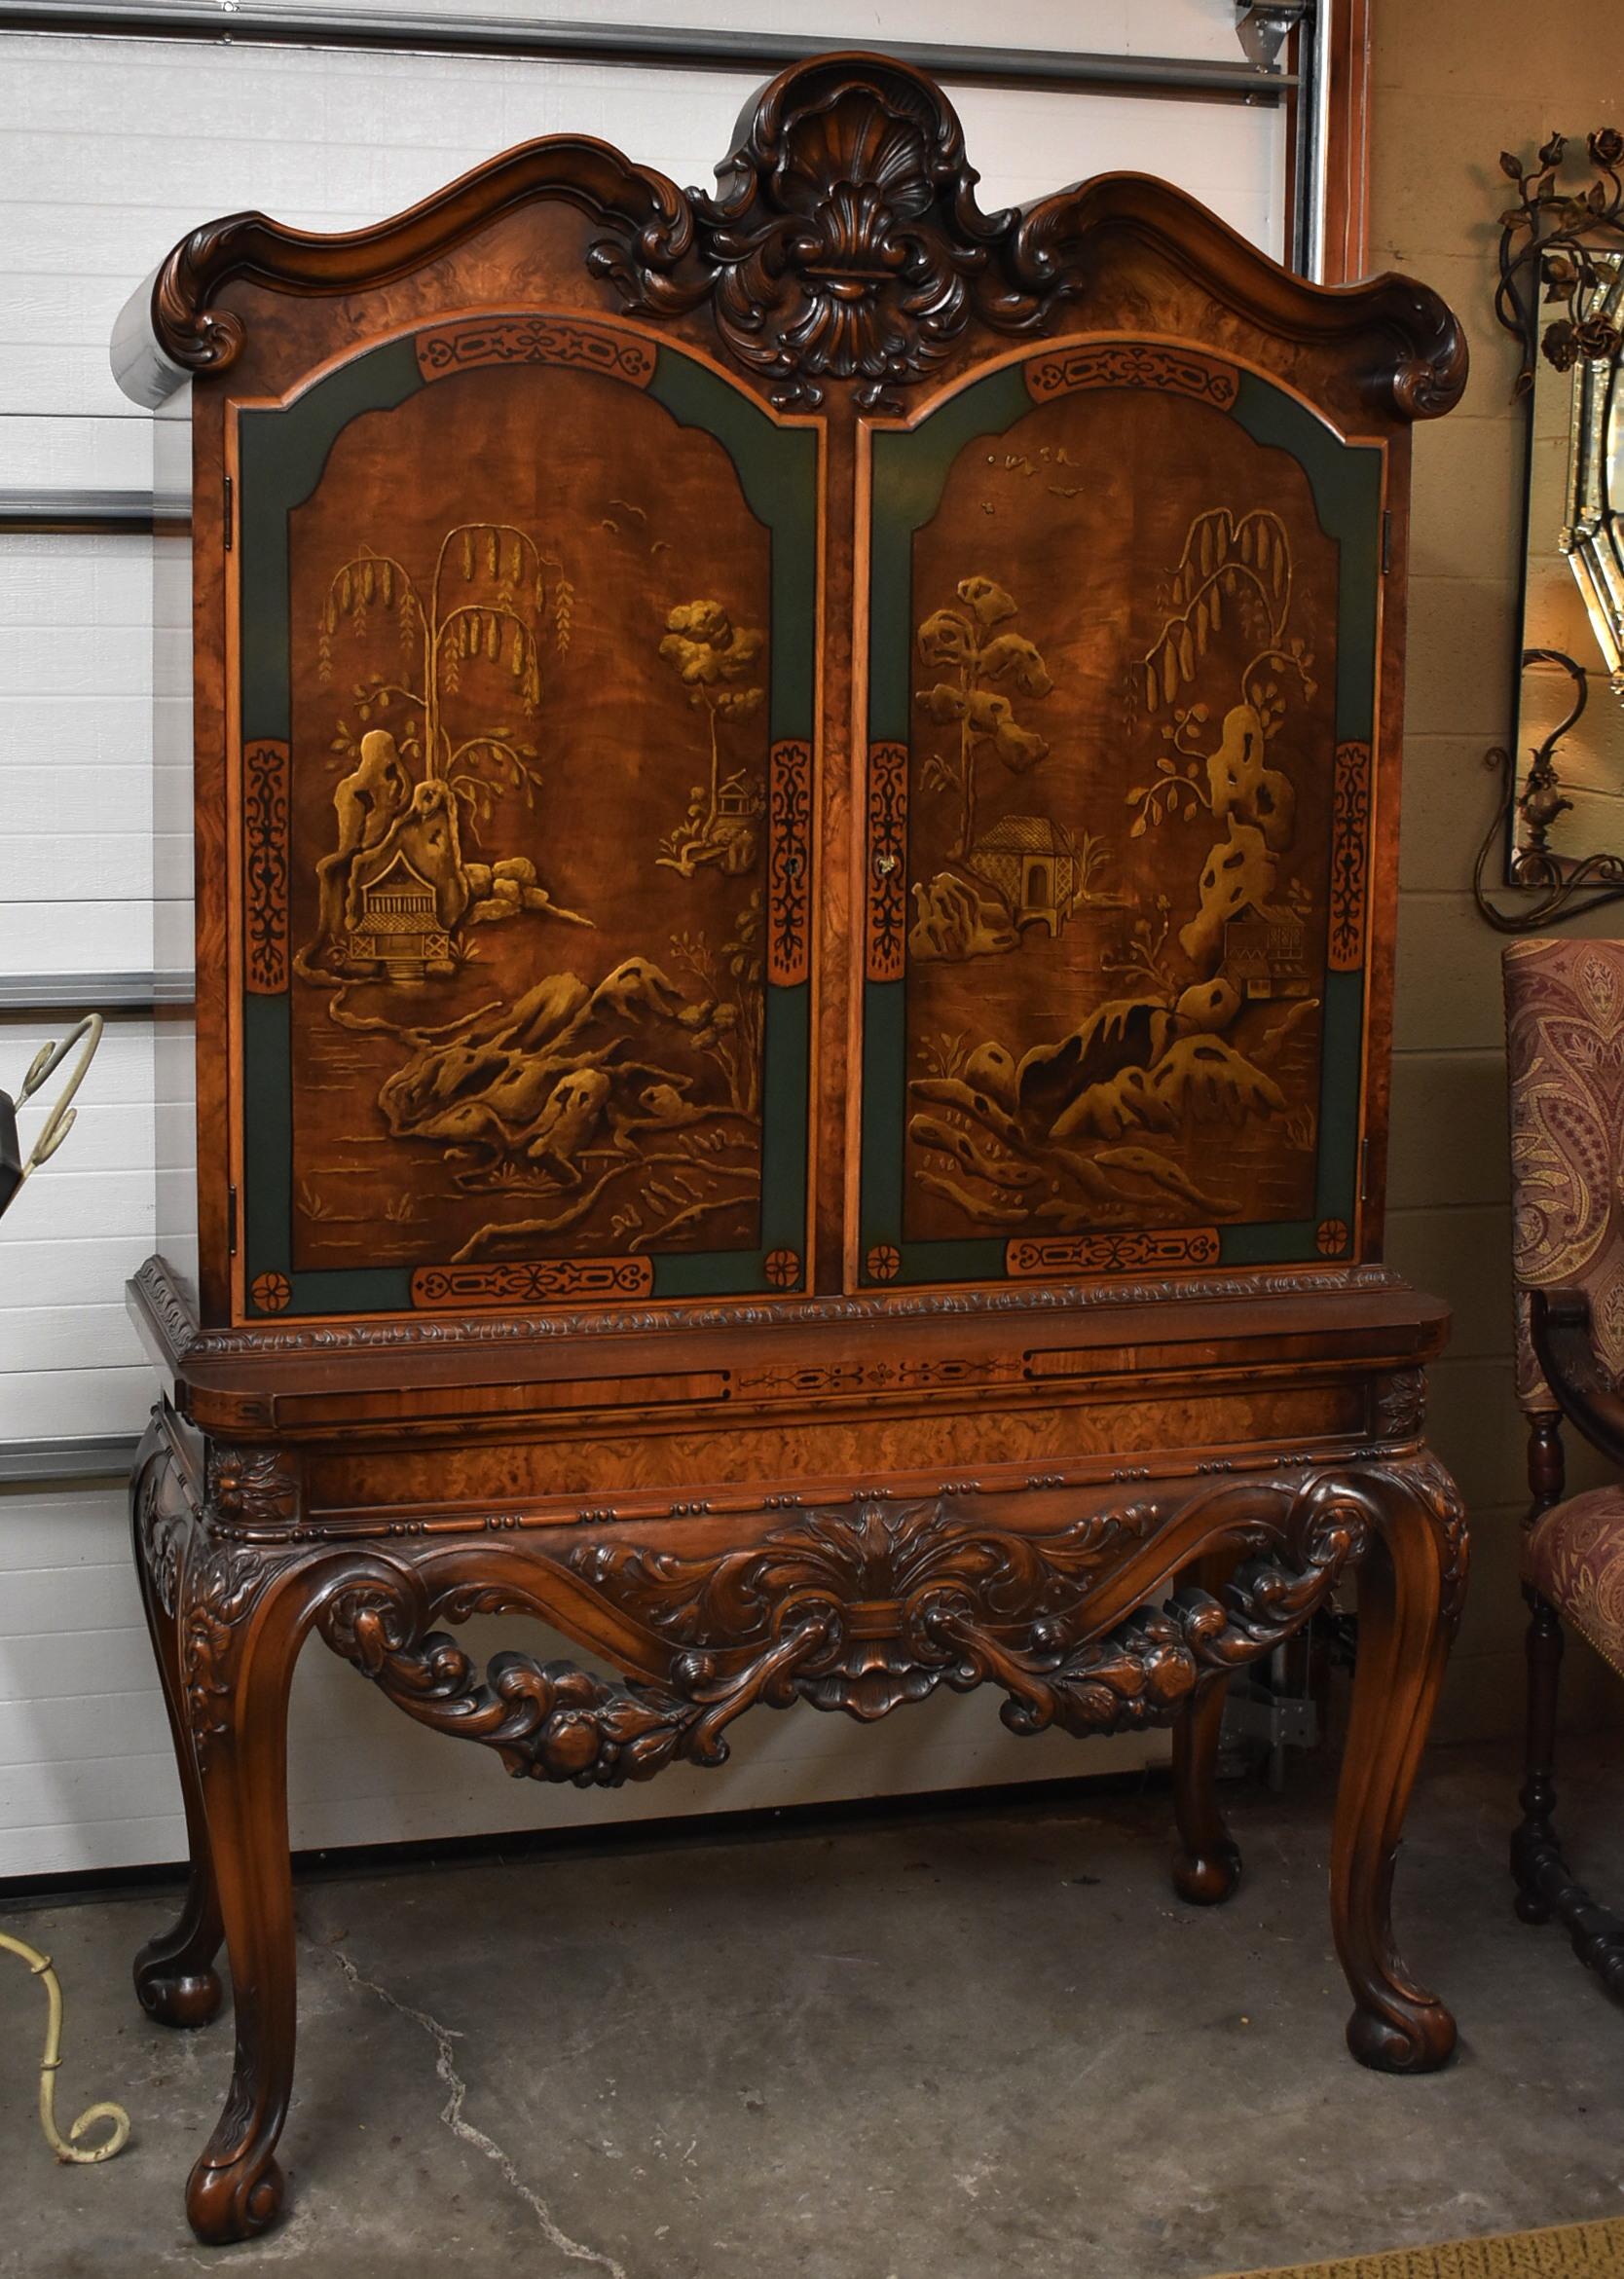 Asian style locking bookcase / cabinet with low relief carved landscape and houses. Made of walnut and burlwood, heavily carved apron of swagged fruit and shell detail at the top, with hand painted doors. Two interior adjustable shelves. Very solid,